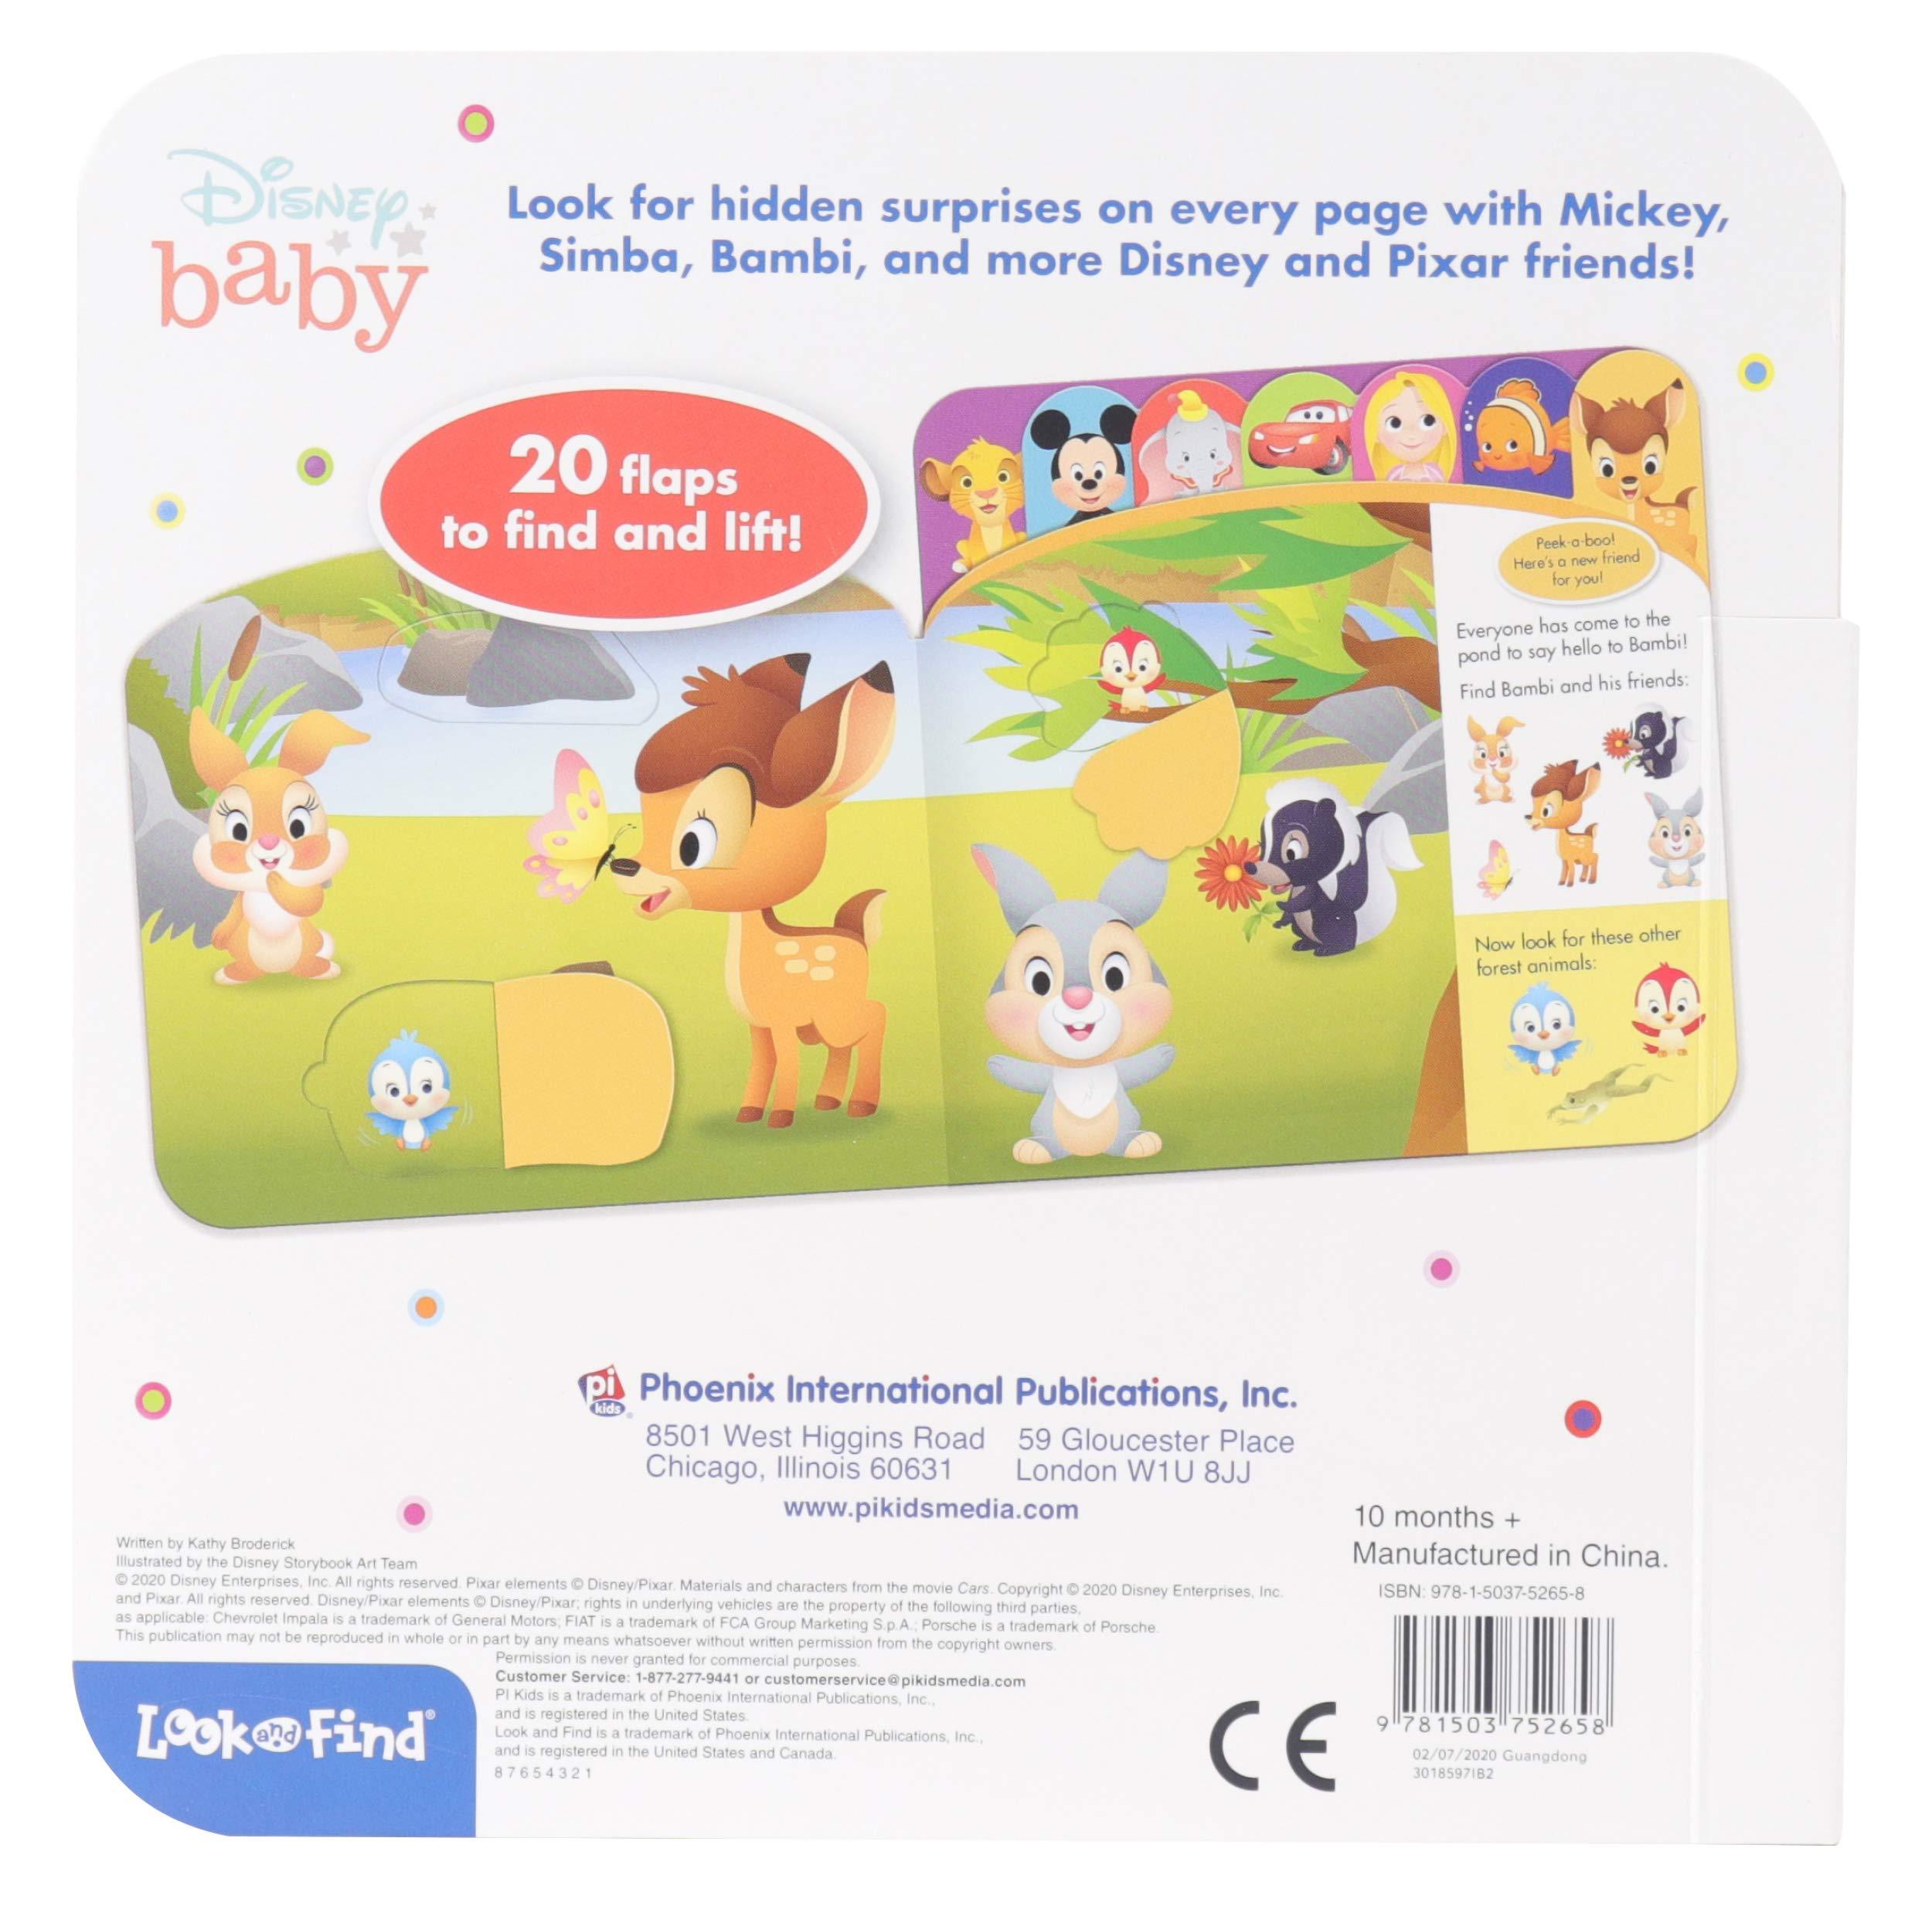 Baby Mickey, Lion King, Princess, and More! - Peek-a-Boo Lift-a-Flap Look and Find Board Book - Ourkids - OKO